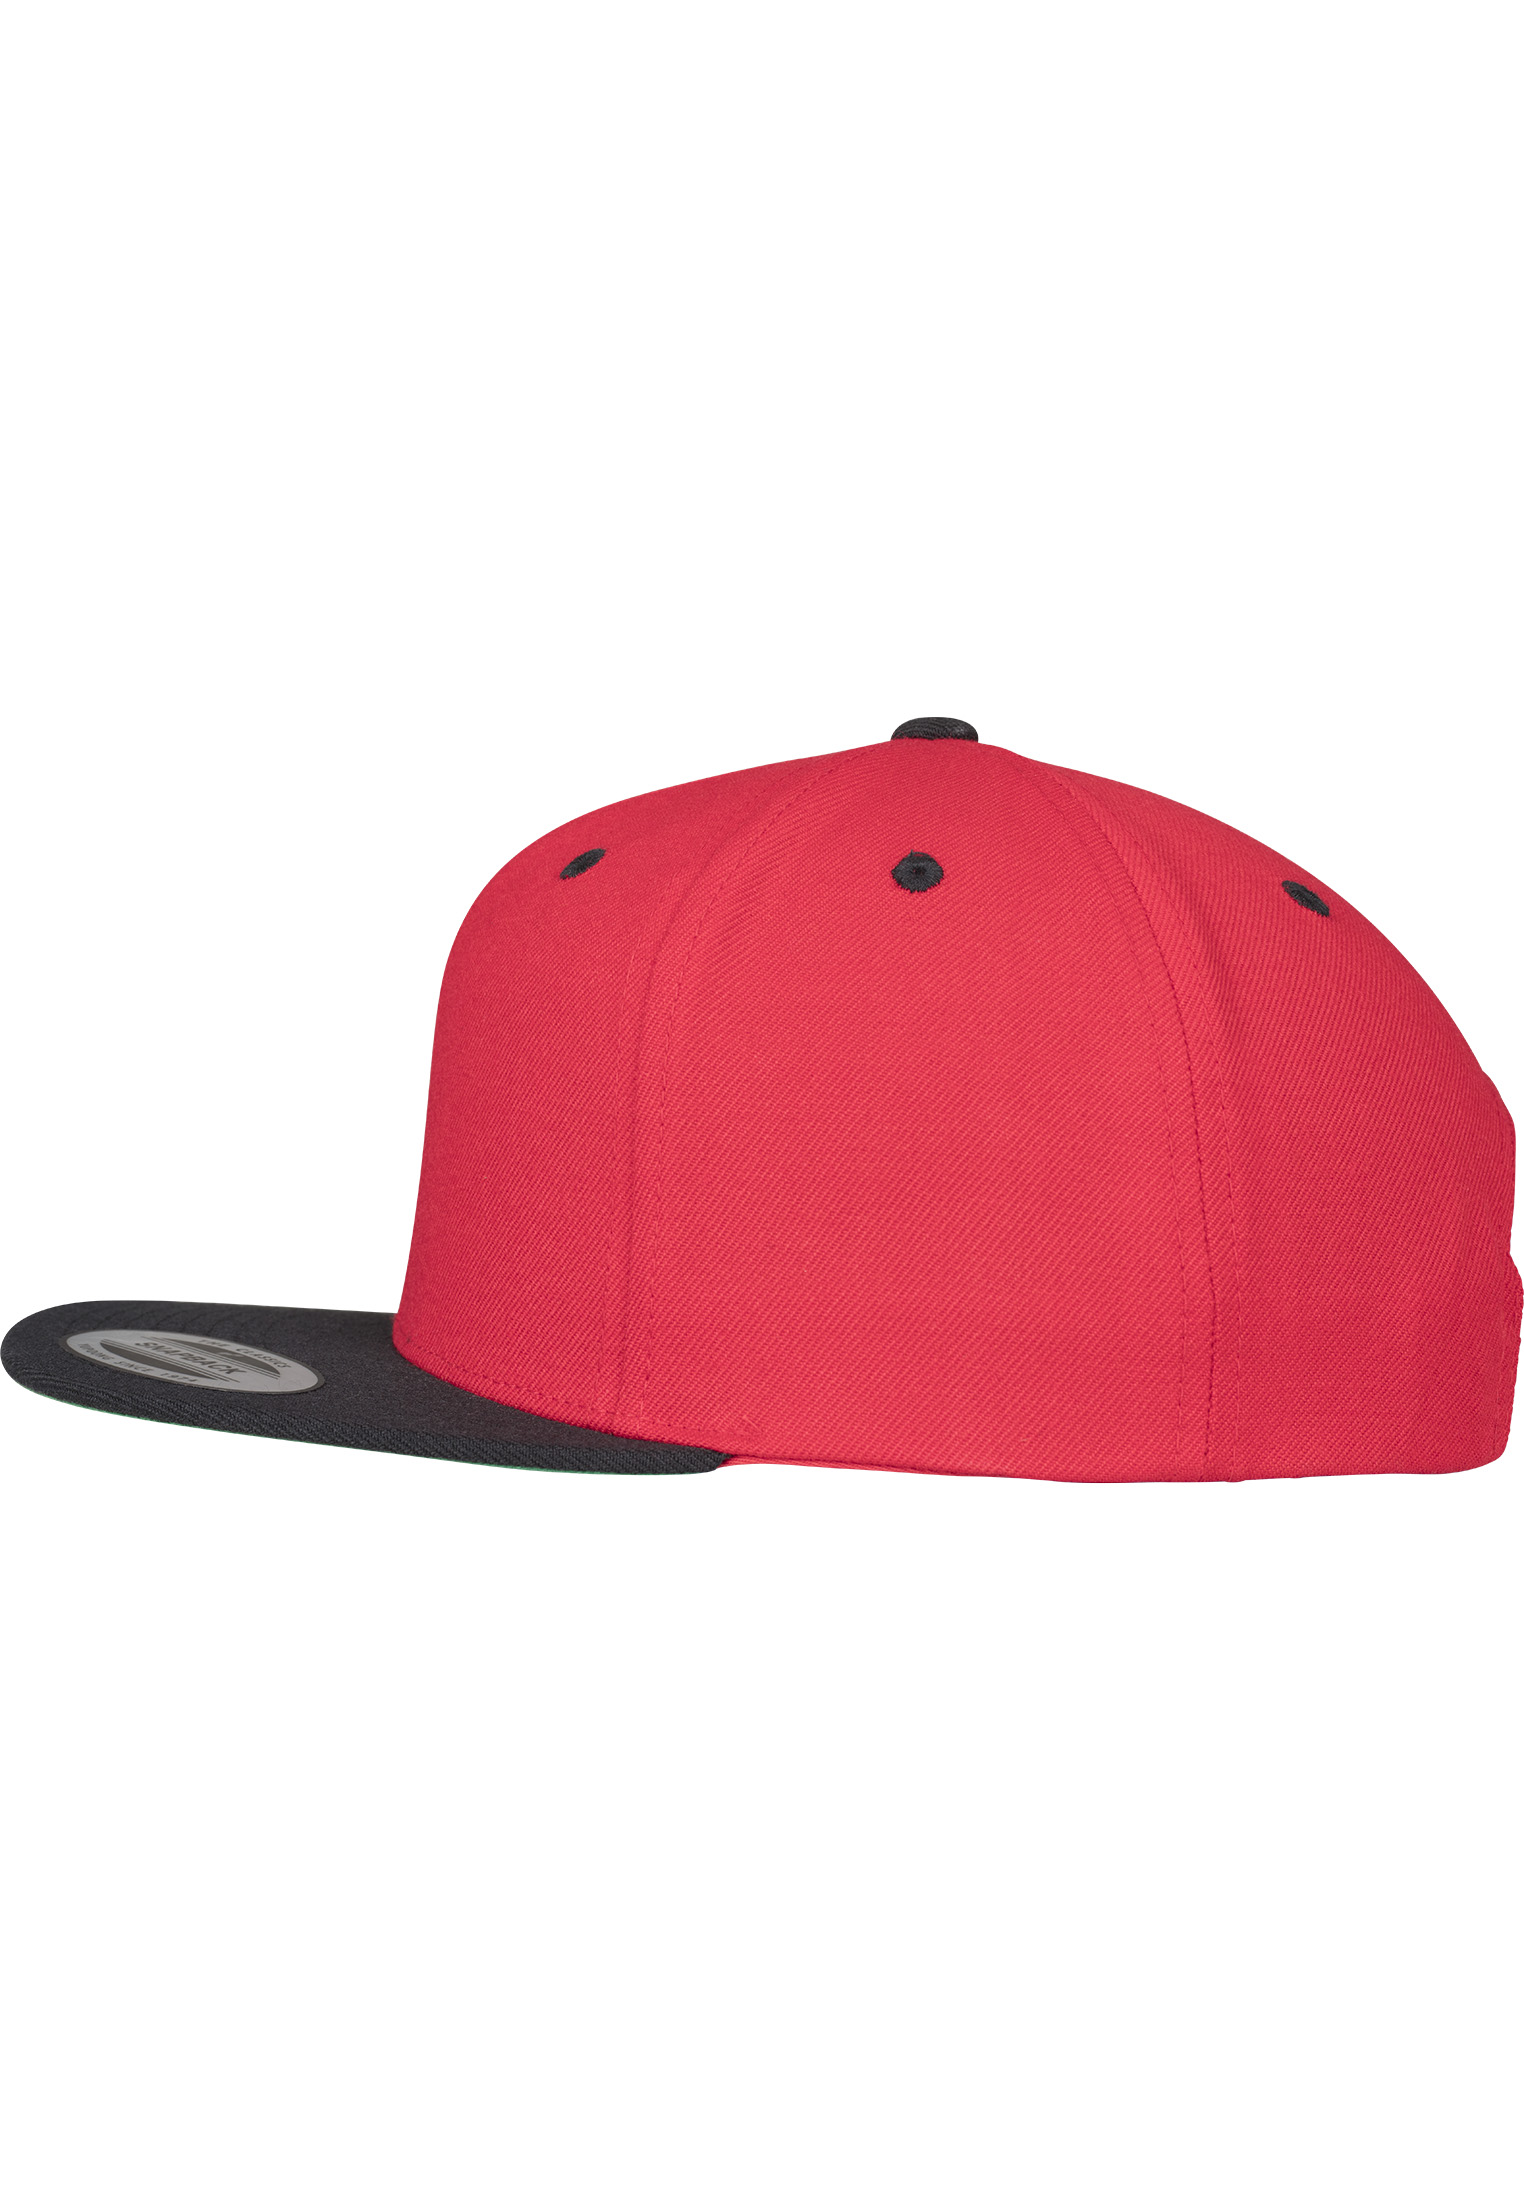 Snapback Classic Snapback 2-Tone in Farbe red/blk